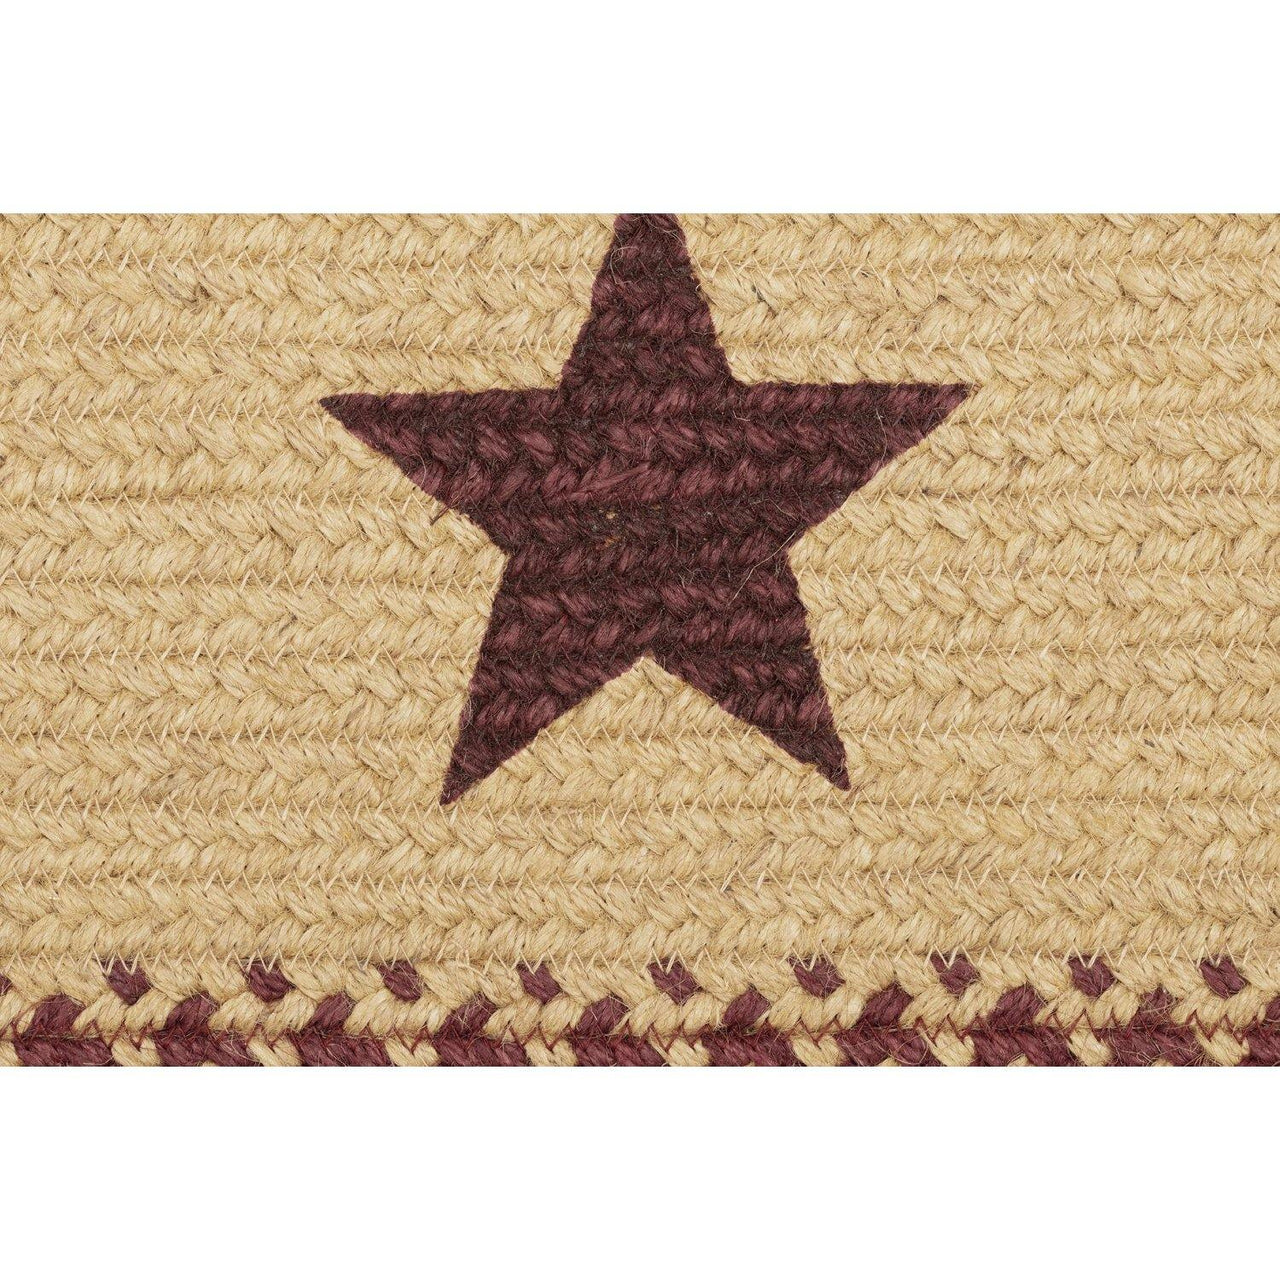 Burgundy Red Primitive Jute Braided Rug Oval Stencil Stars 24"x36" with Rug Pad VHC Brands - The Fox Decor